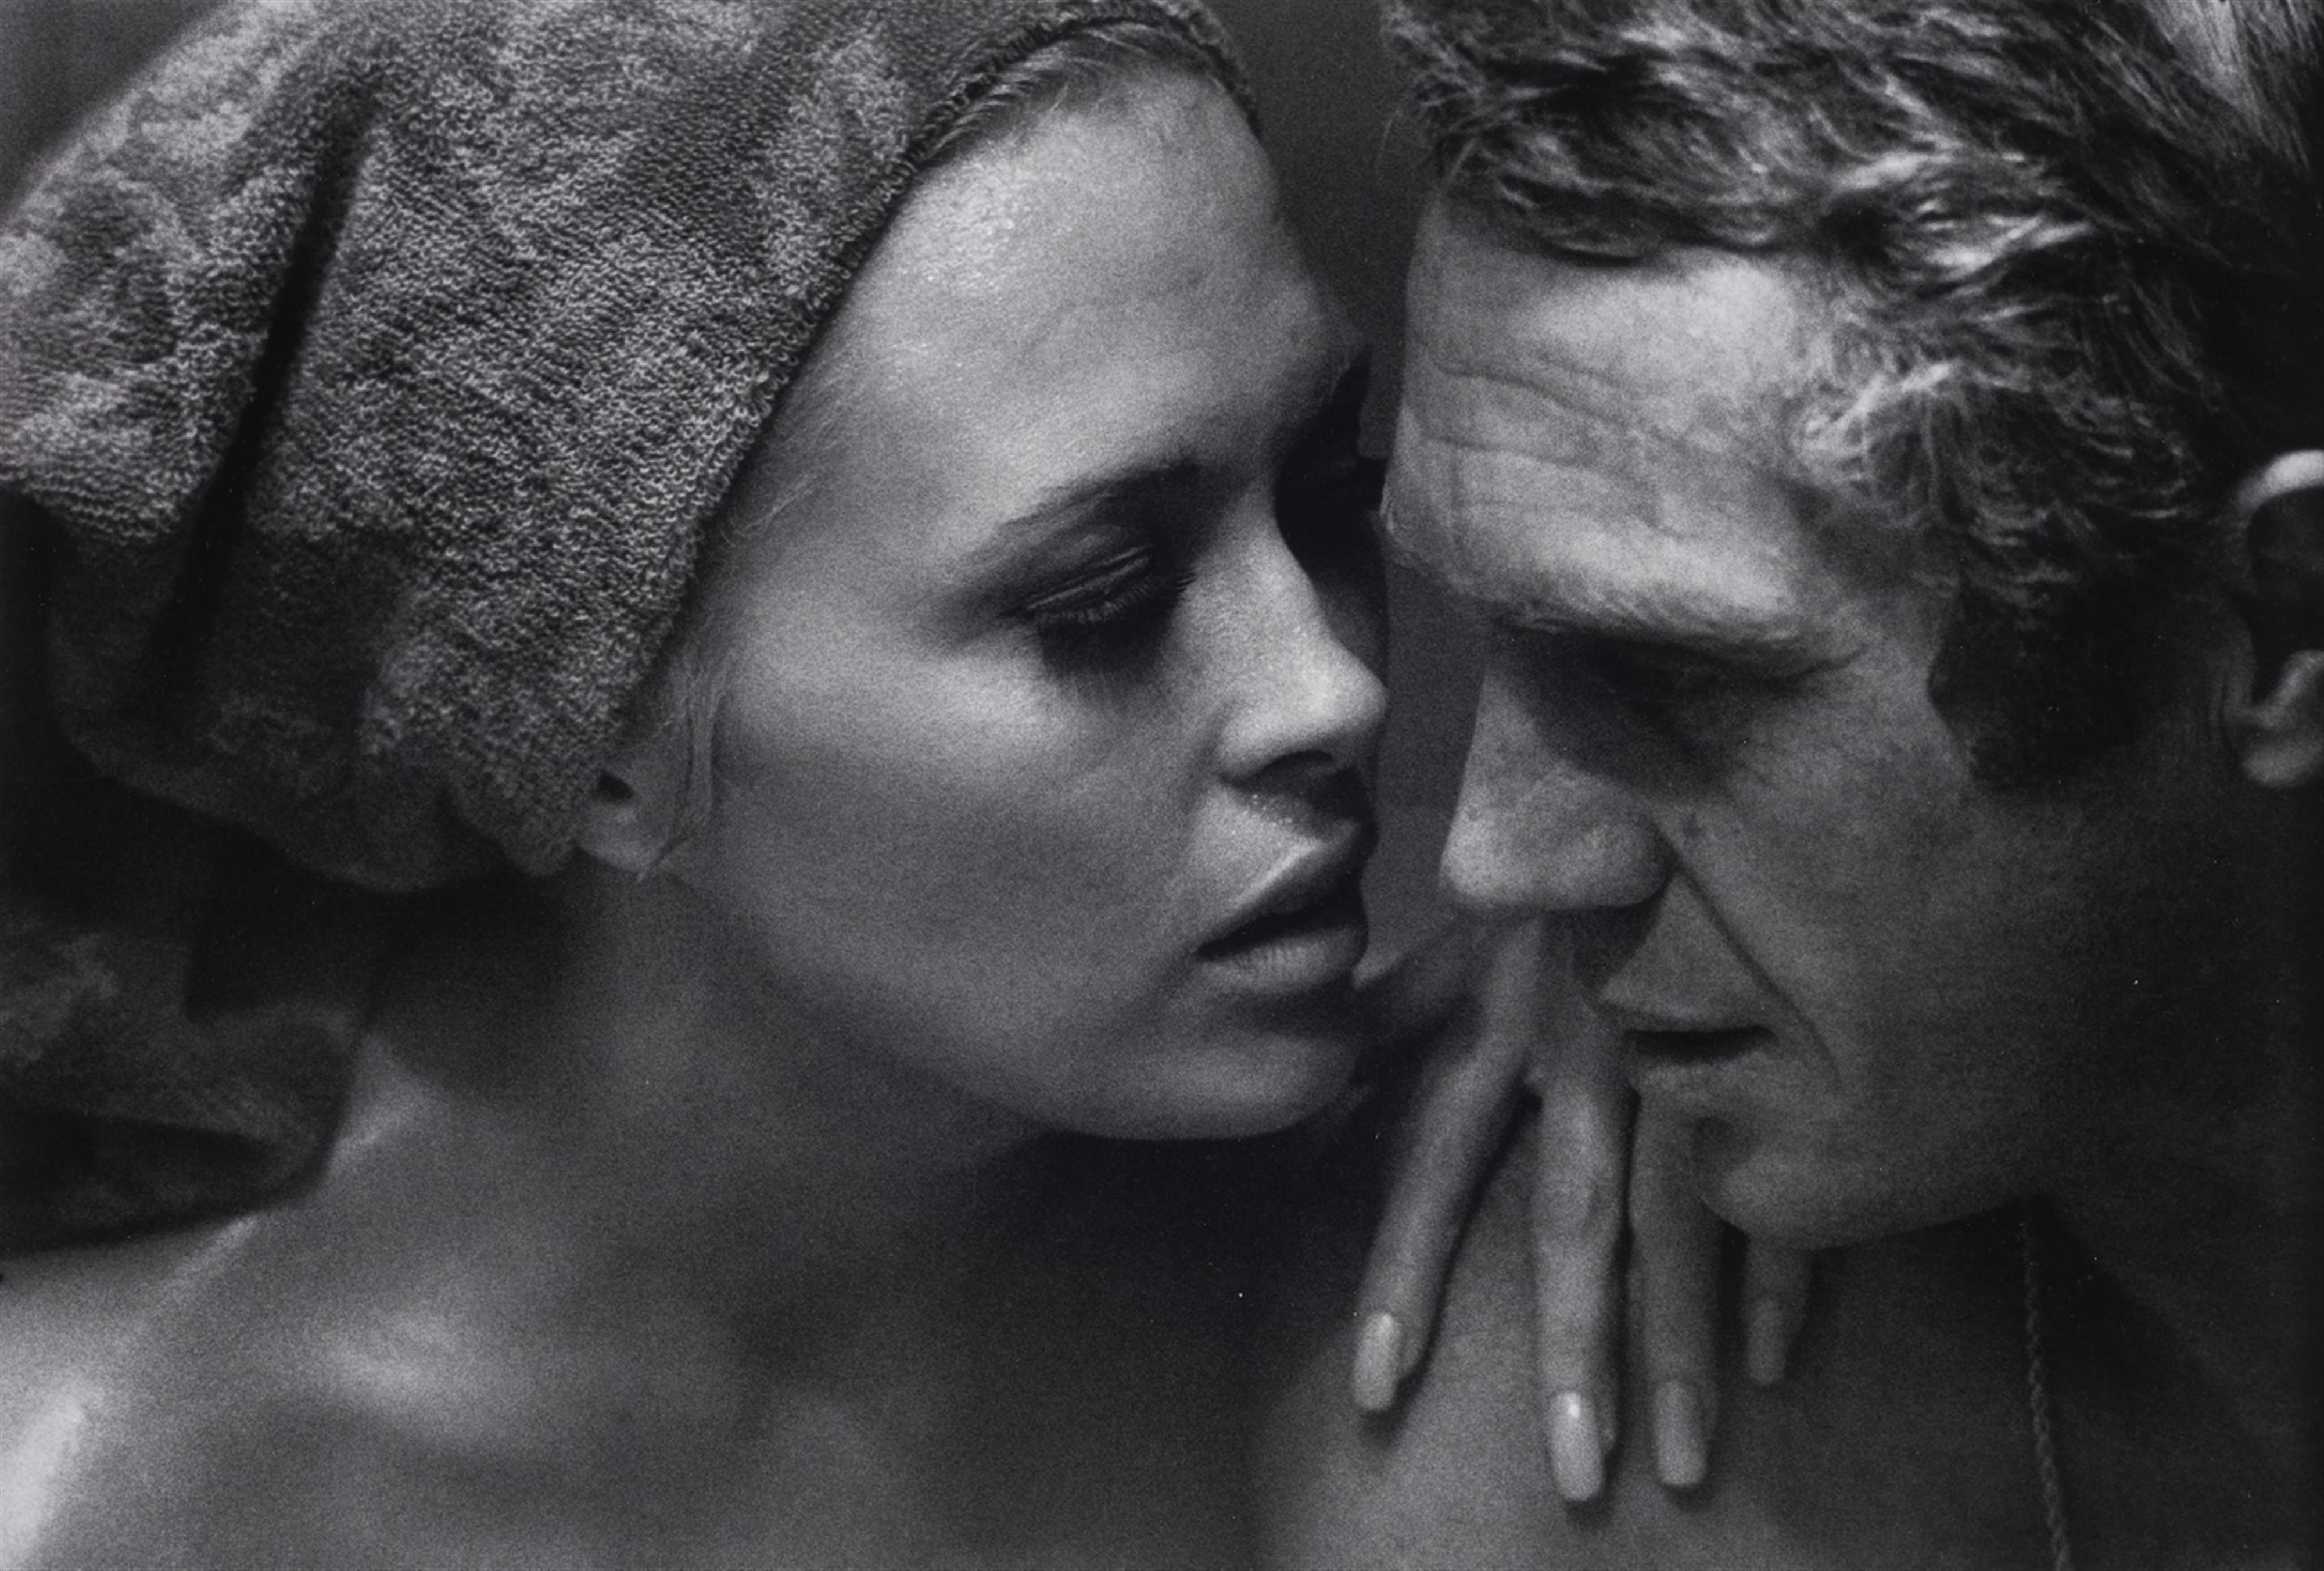 Bill Ray - Faye Dunaway & Steve McQueen (at the set of 'Thomas Crown Affair')